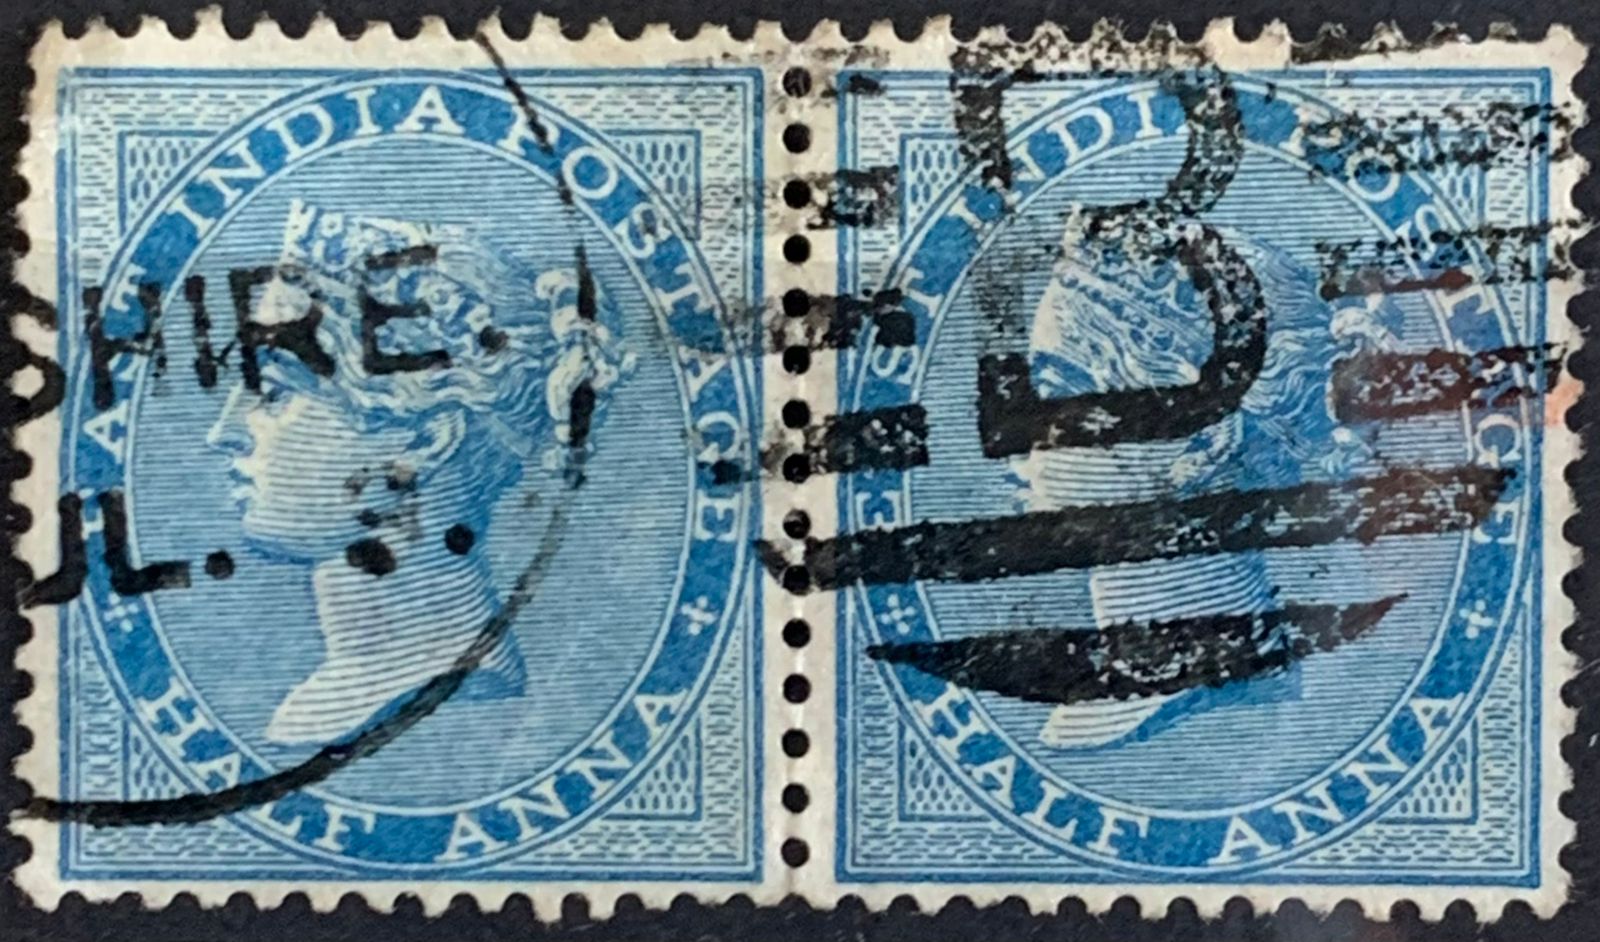 India 1876 QV 1/2a Pair Used Abroad in BUSHIRE Fine Cancelled